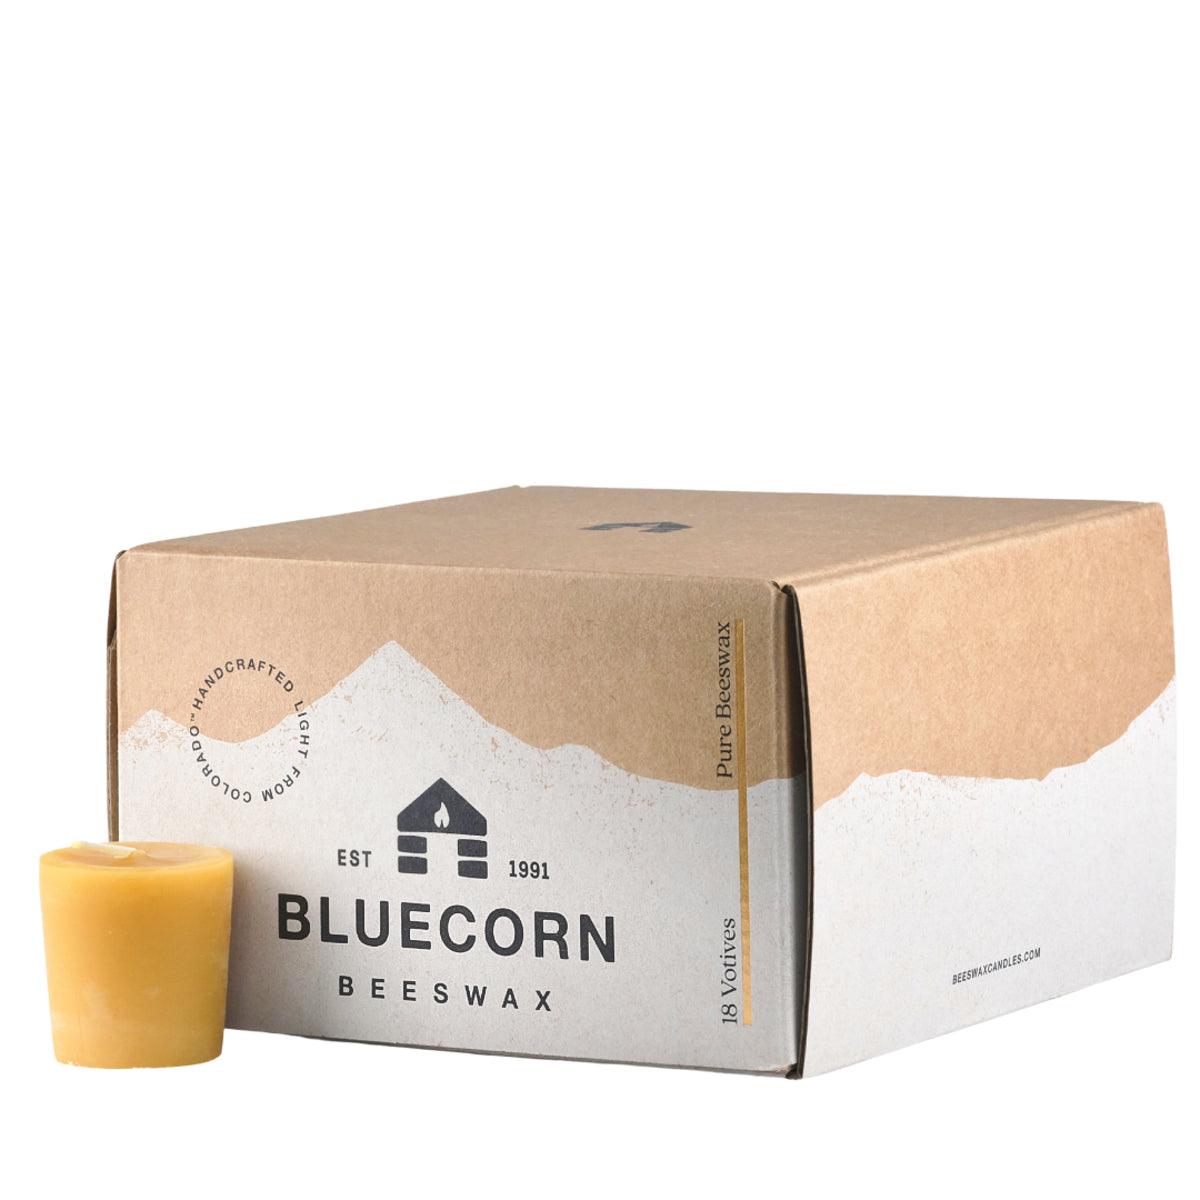 beeswax votive candle next to a Bluecorn Beeswax 18-pack beeswax votive candles bulk box  